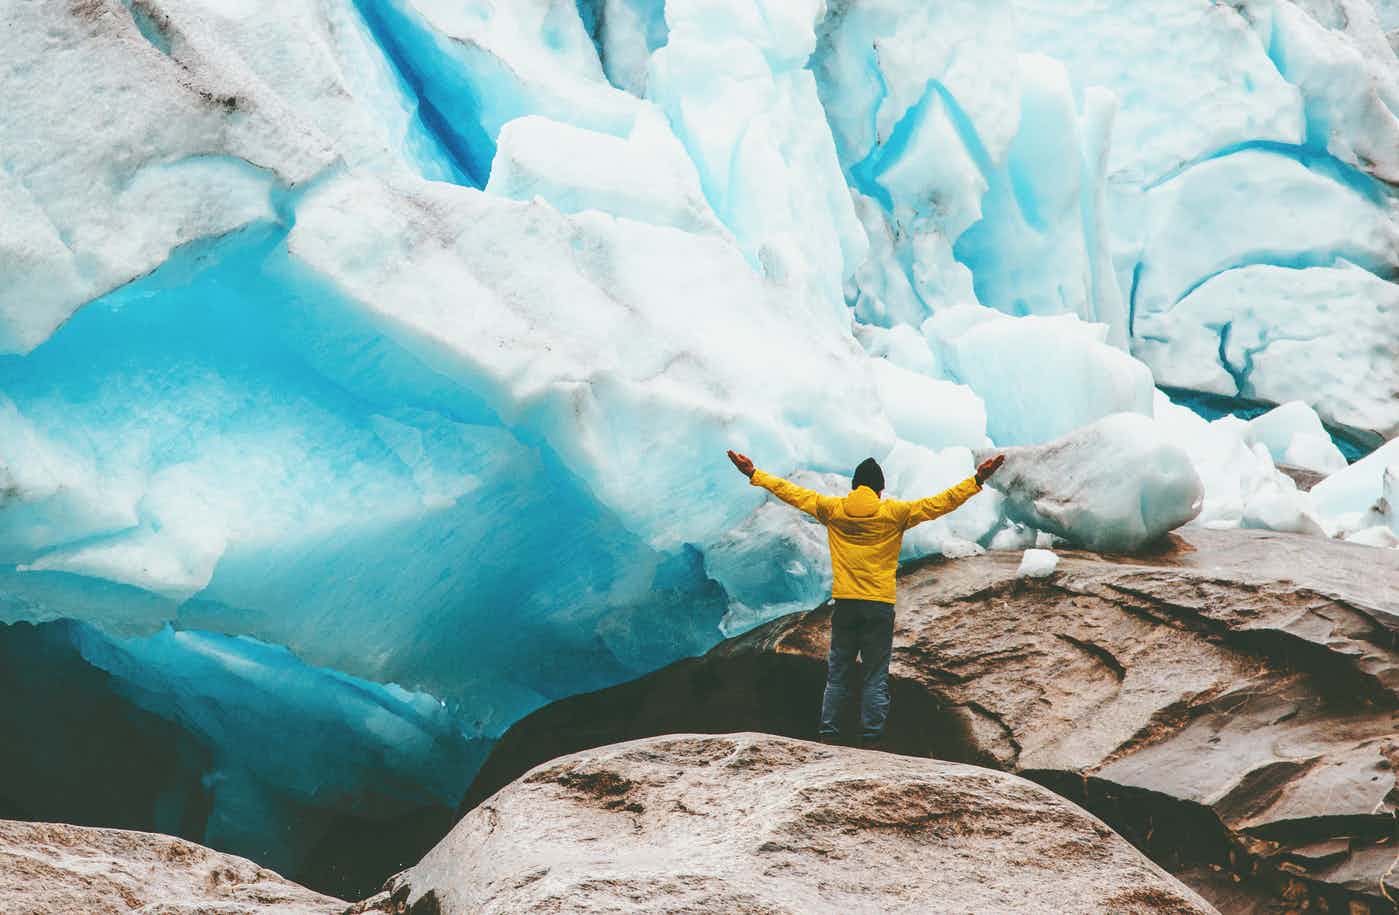 A male hiker stands in front of the Styggebreen Glacier, Norway. 